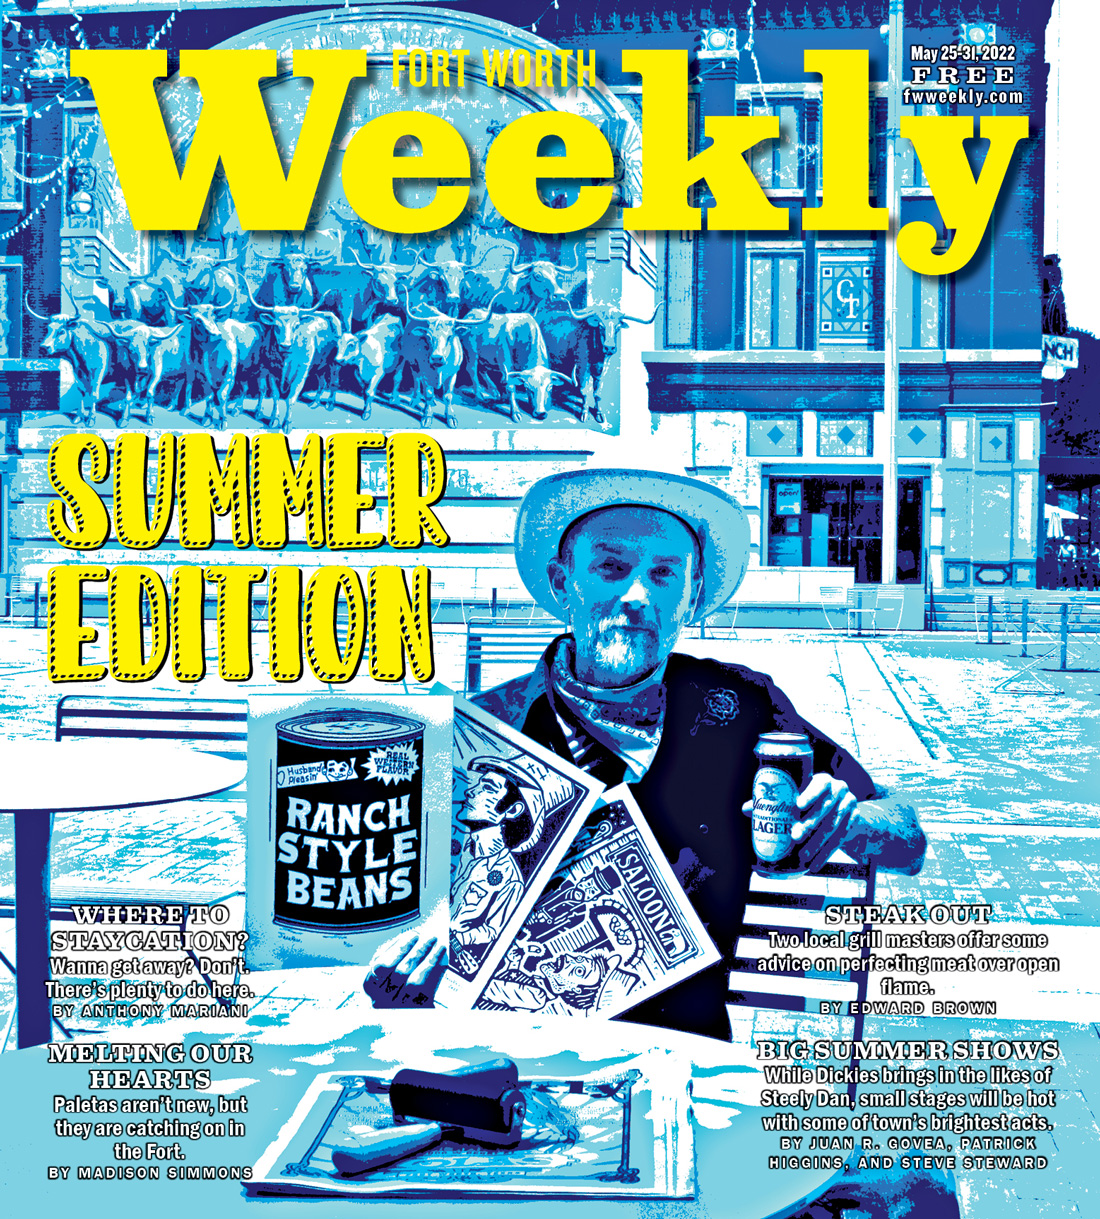 Welcome to Summer Edition 2022 - Fort Worth Weekly